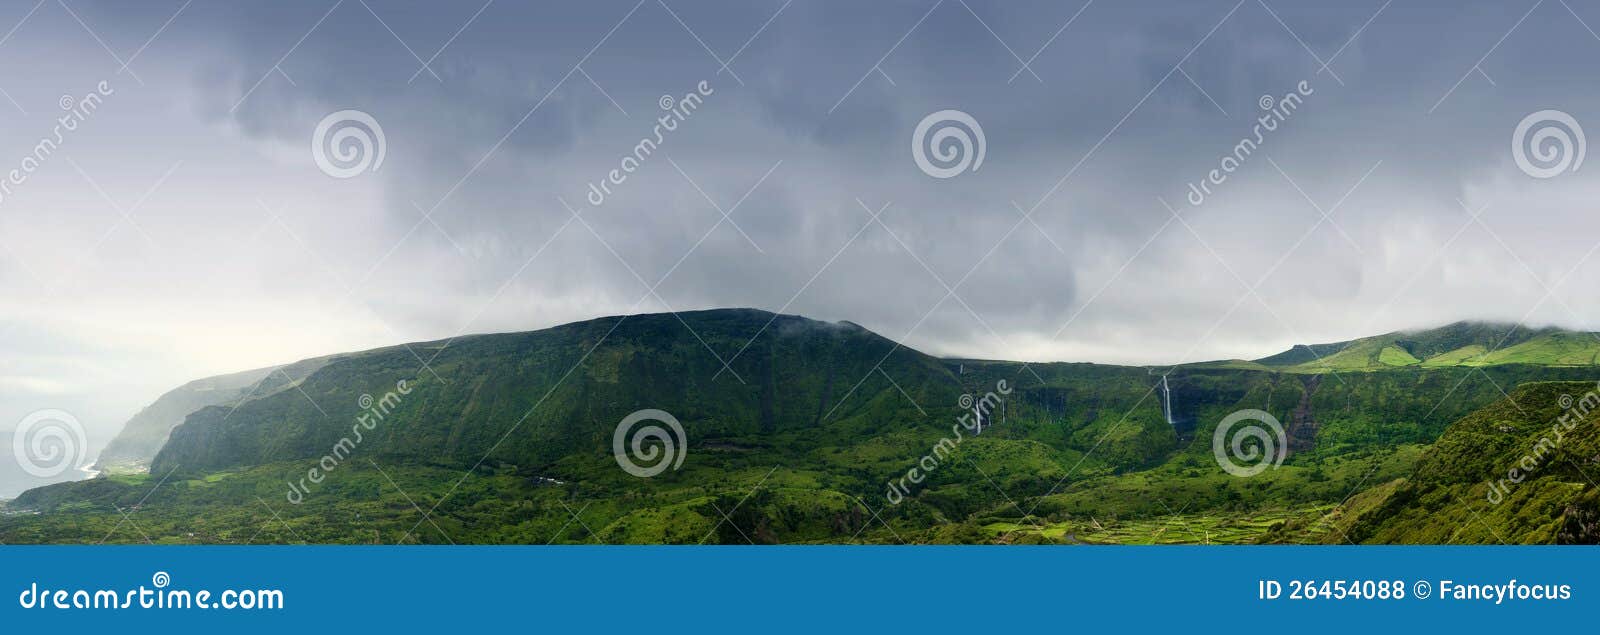 cloudy mountains of flores, acores islands